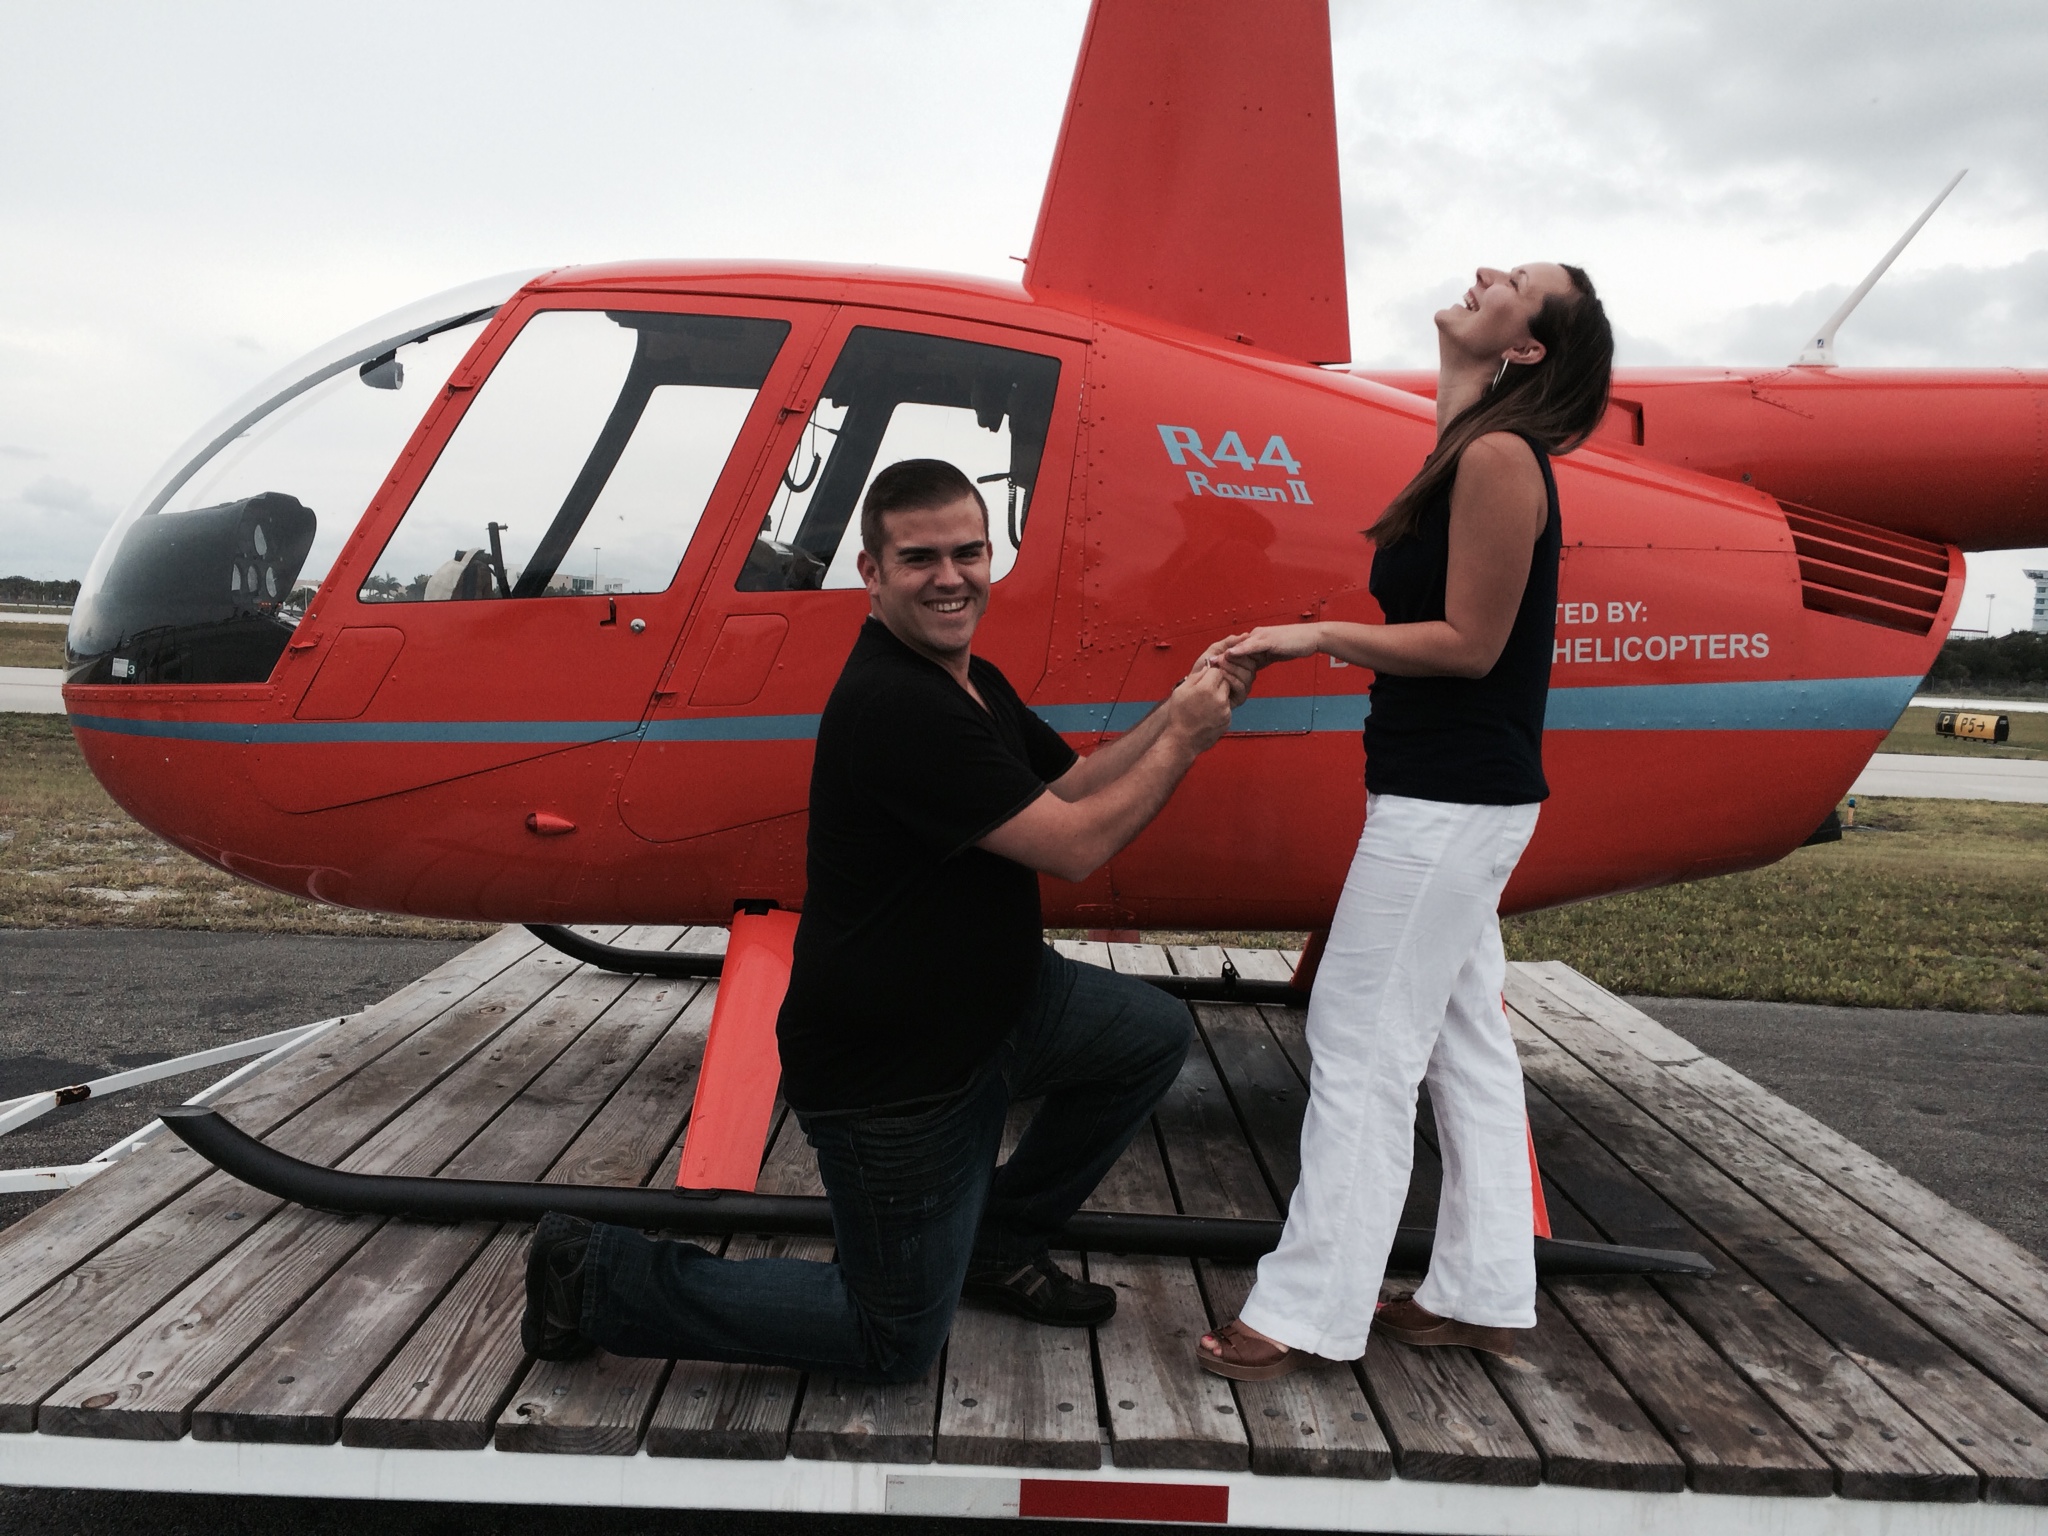 Helicopter proposal. Perfect propose 4